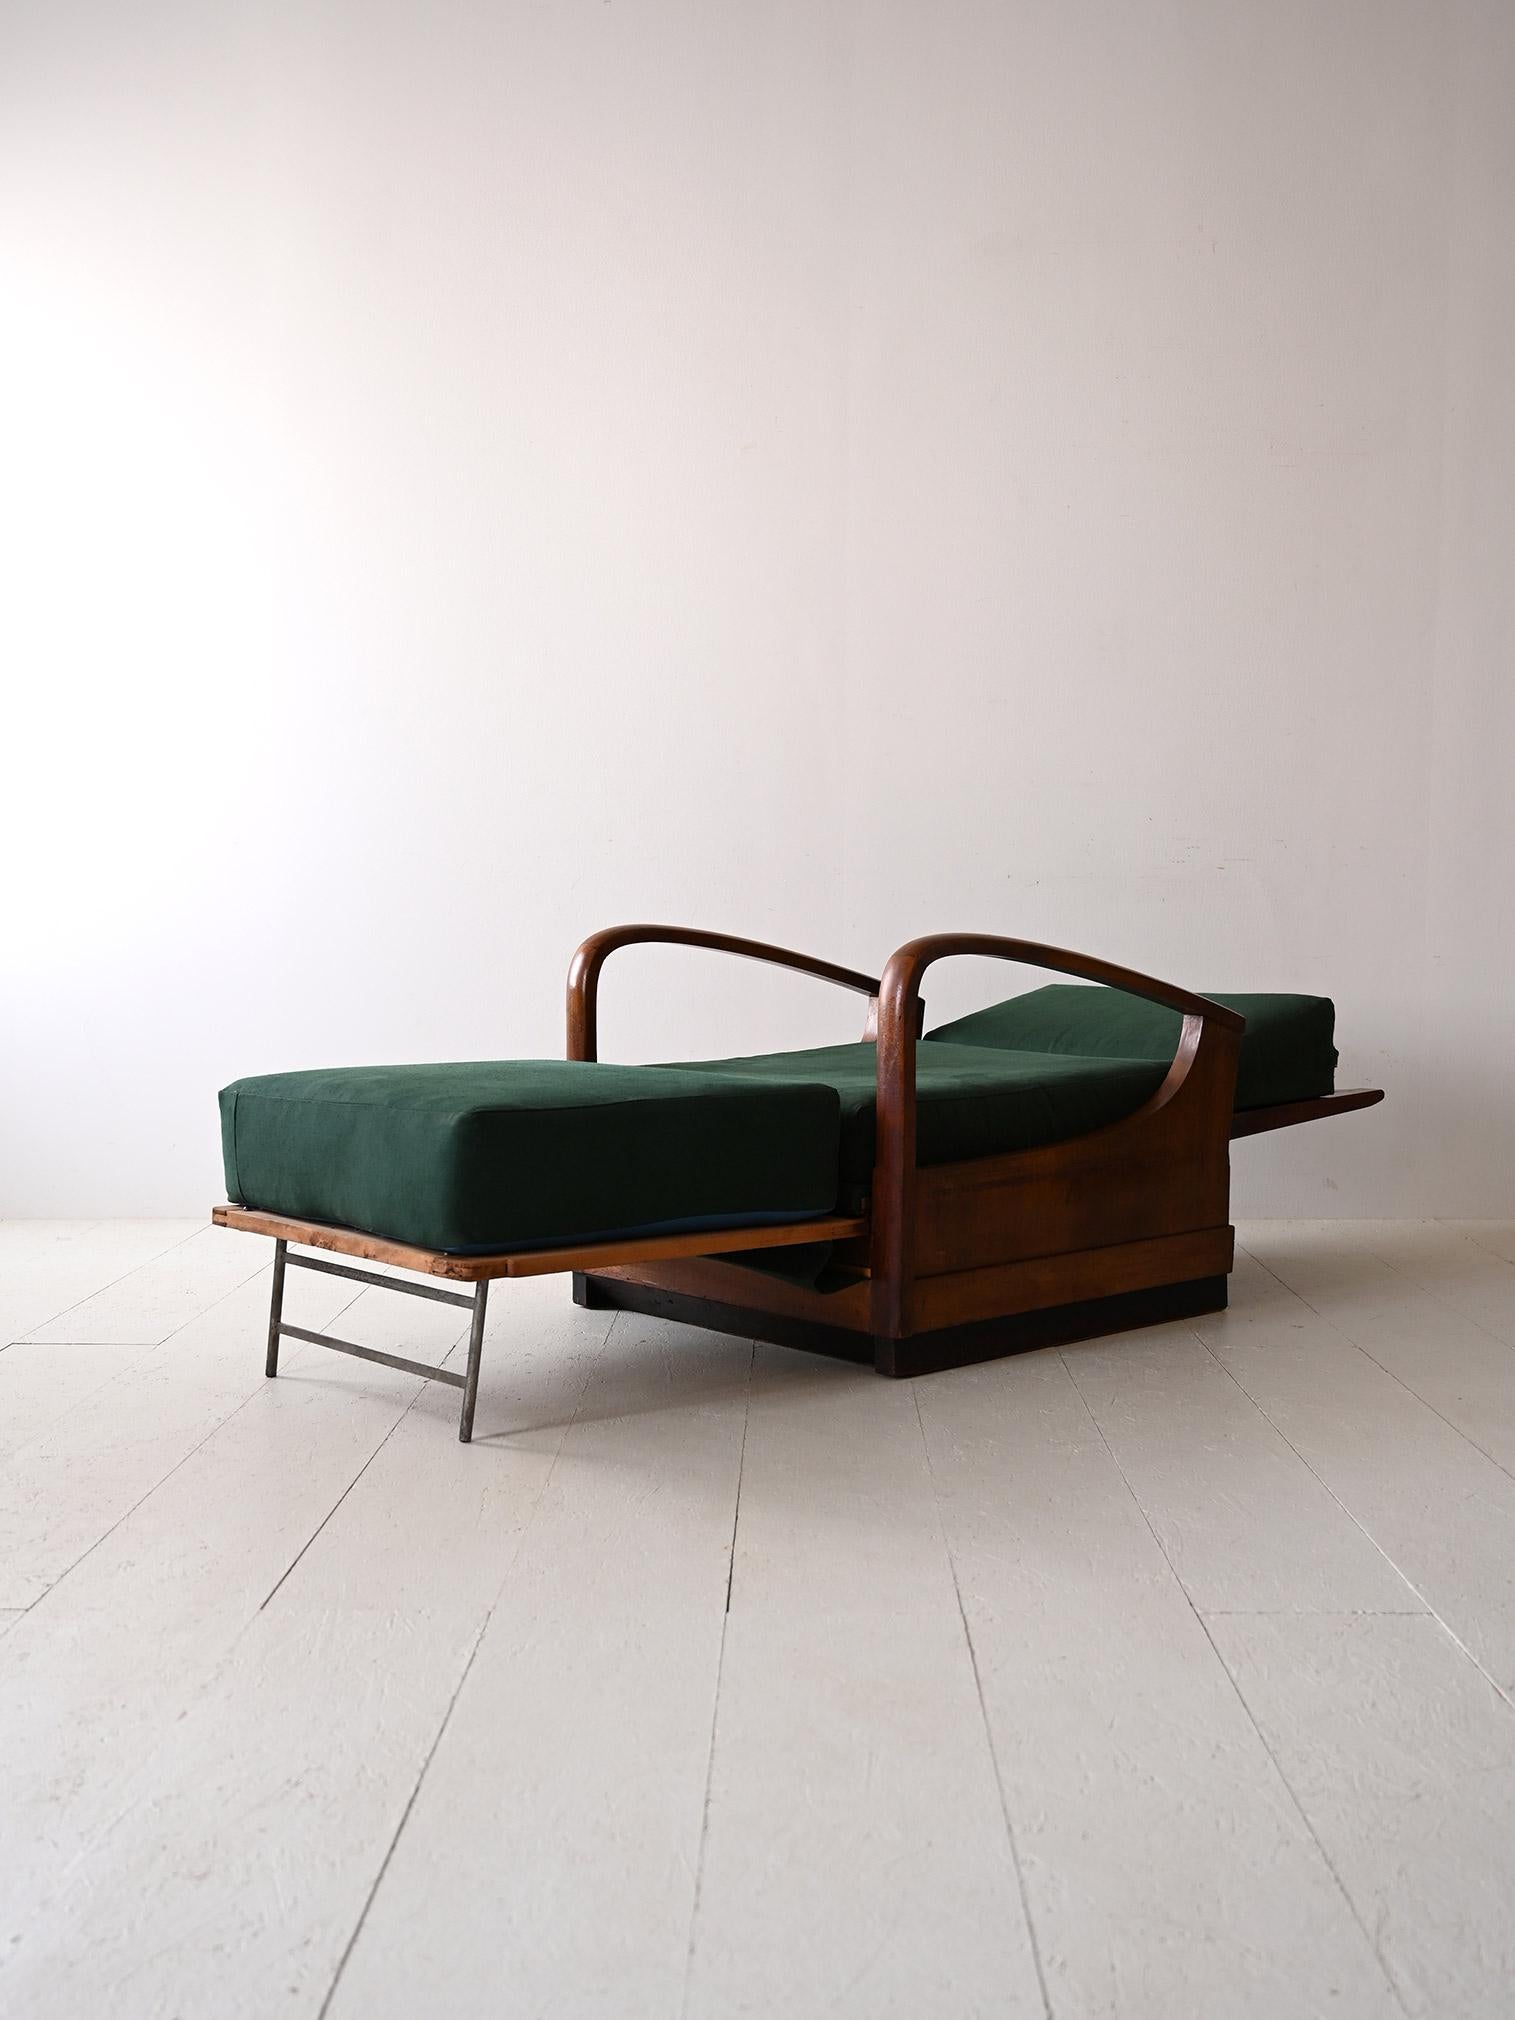 Wood Deco armchair convertible into bed For Sale